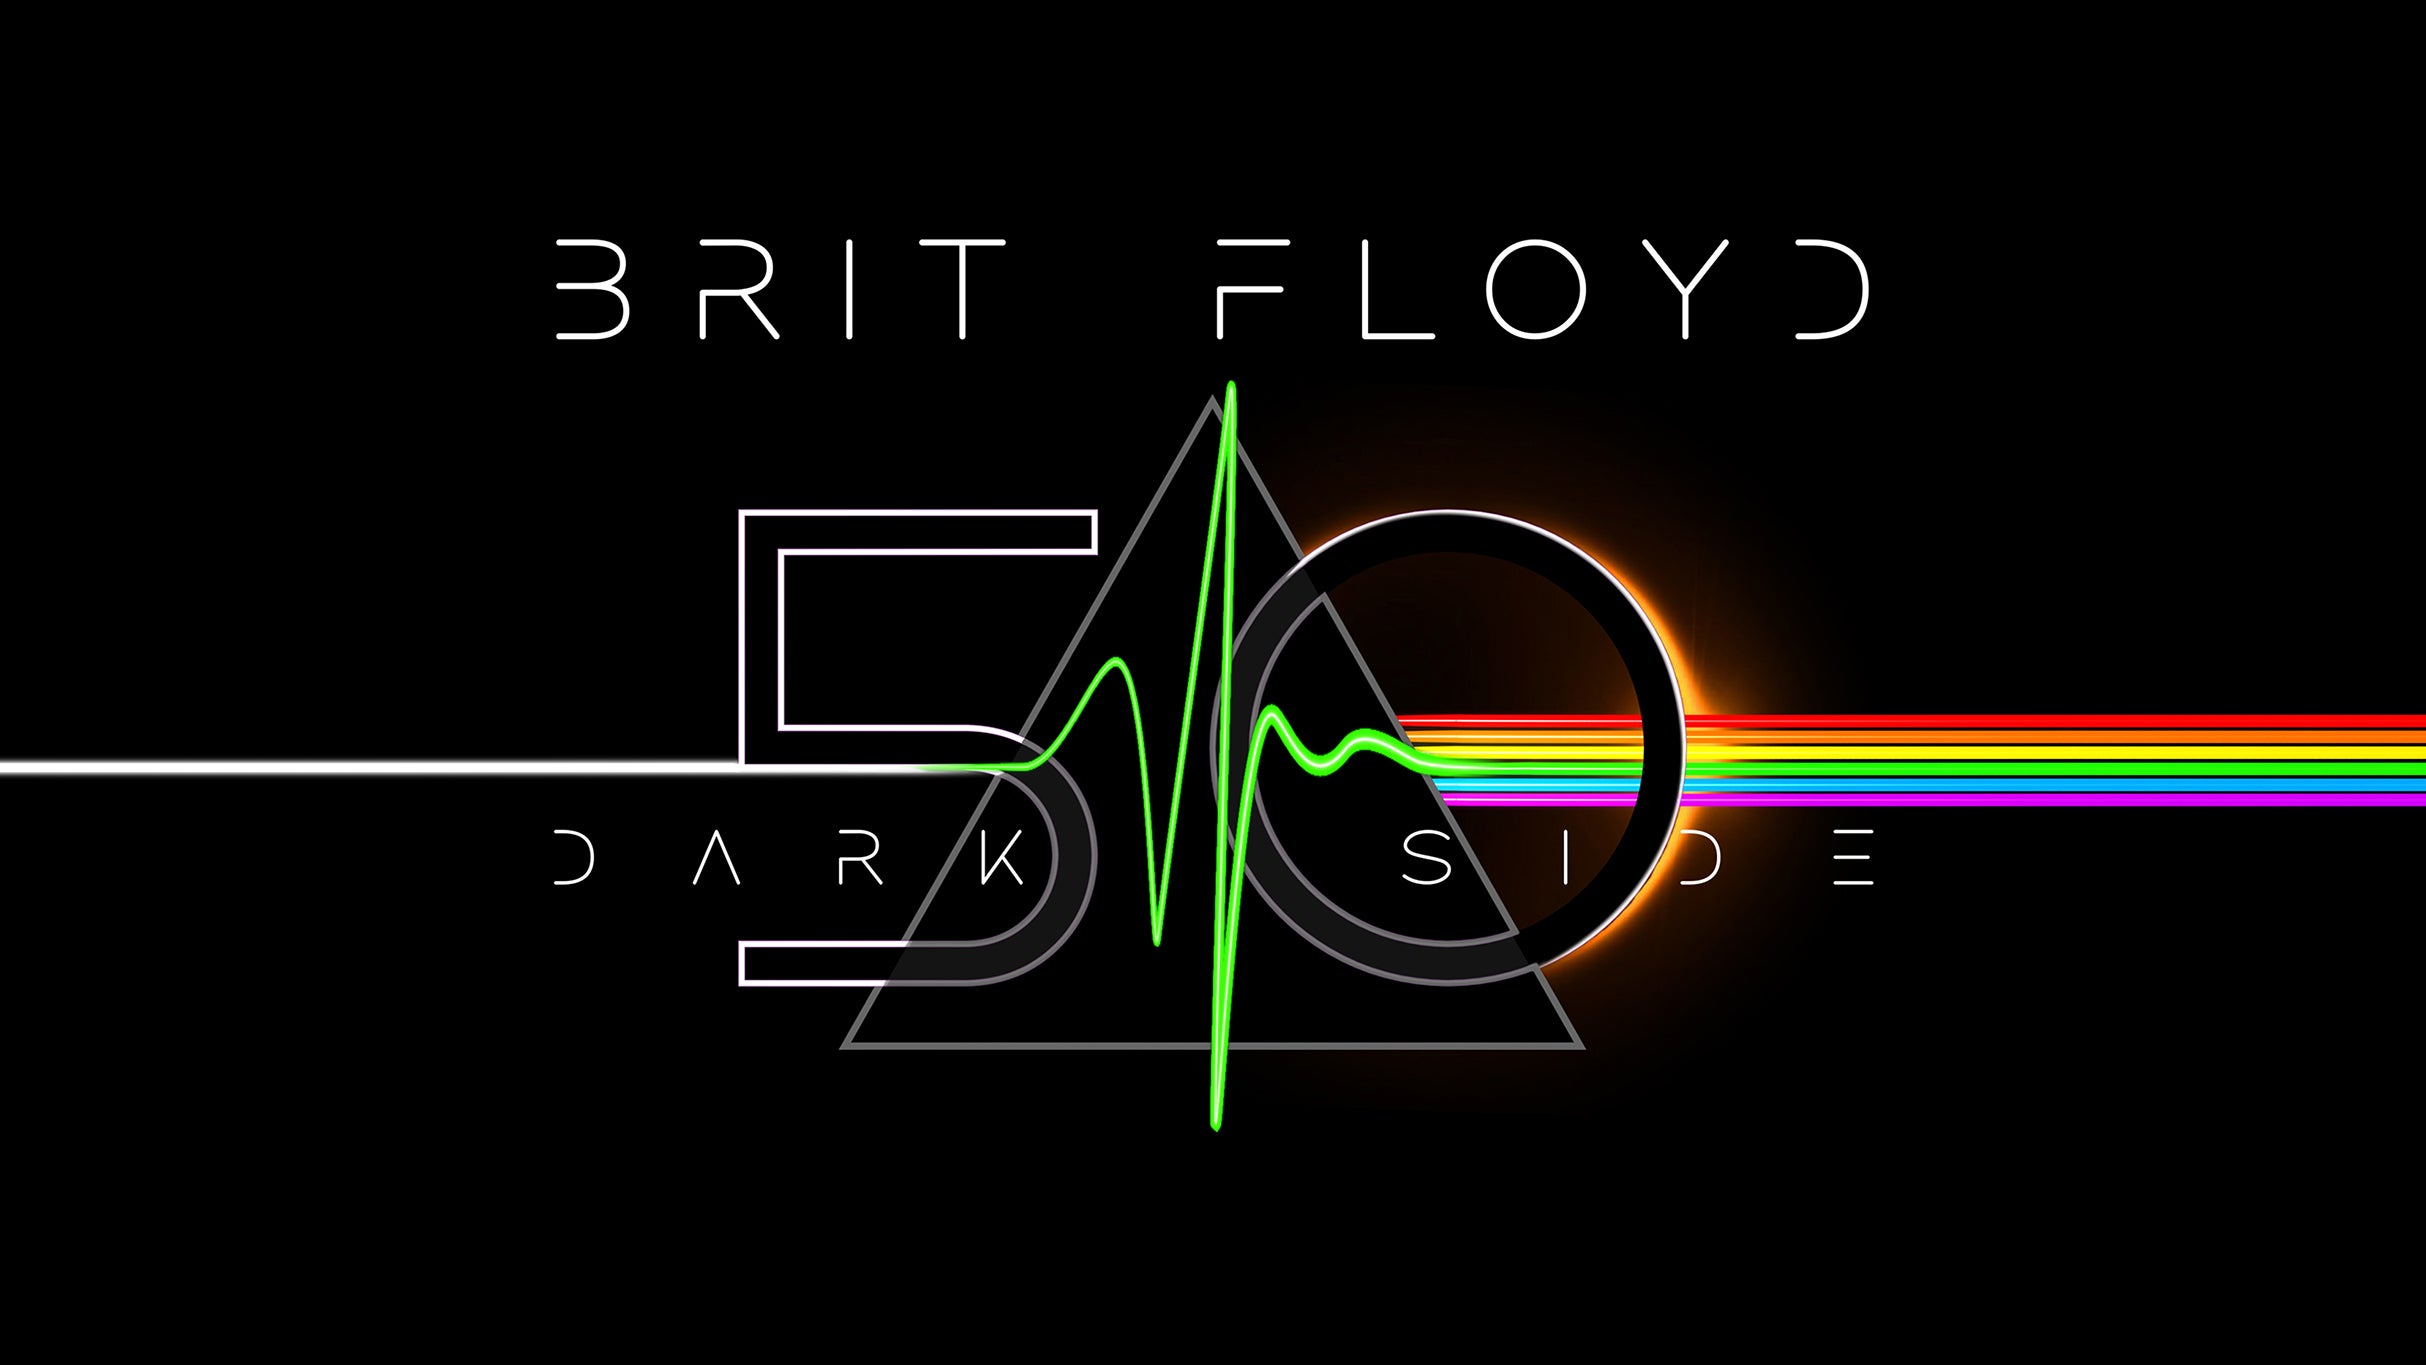 Brit Floyd free pre-sale code for early tickets in Baltimore